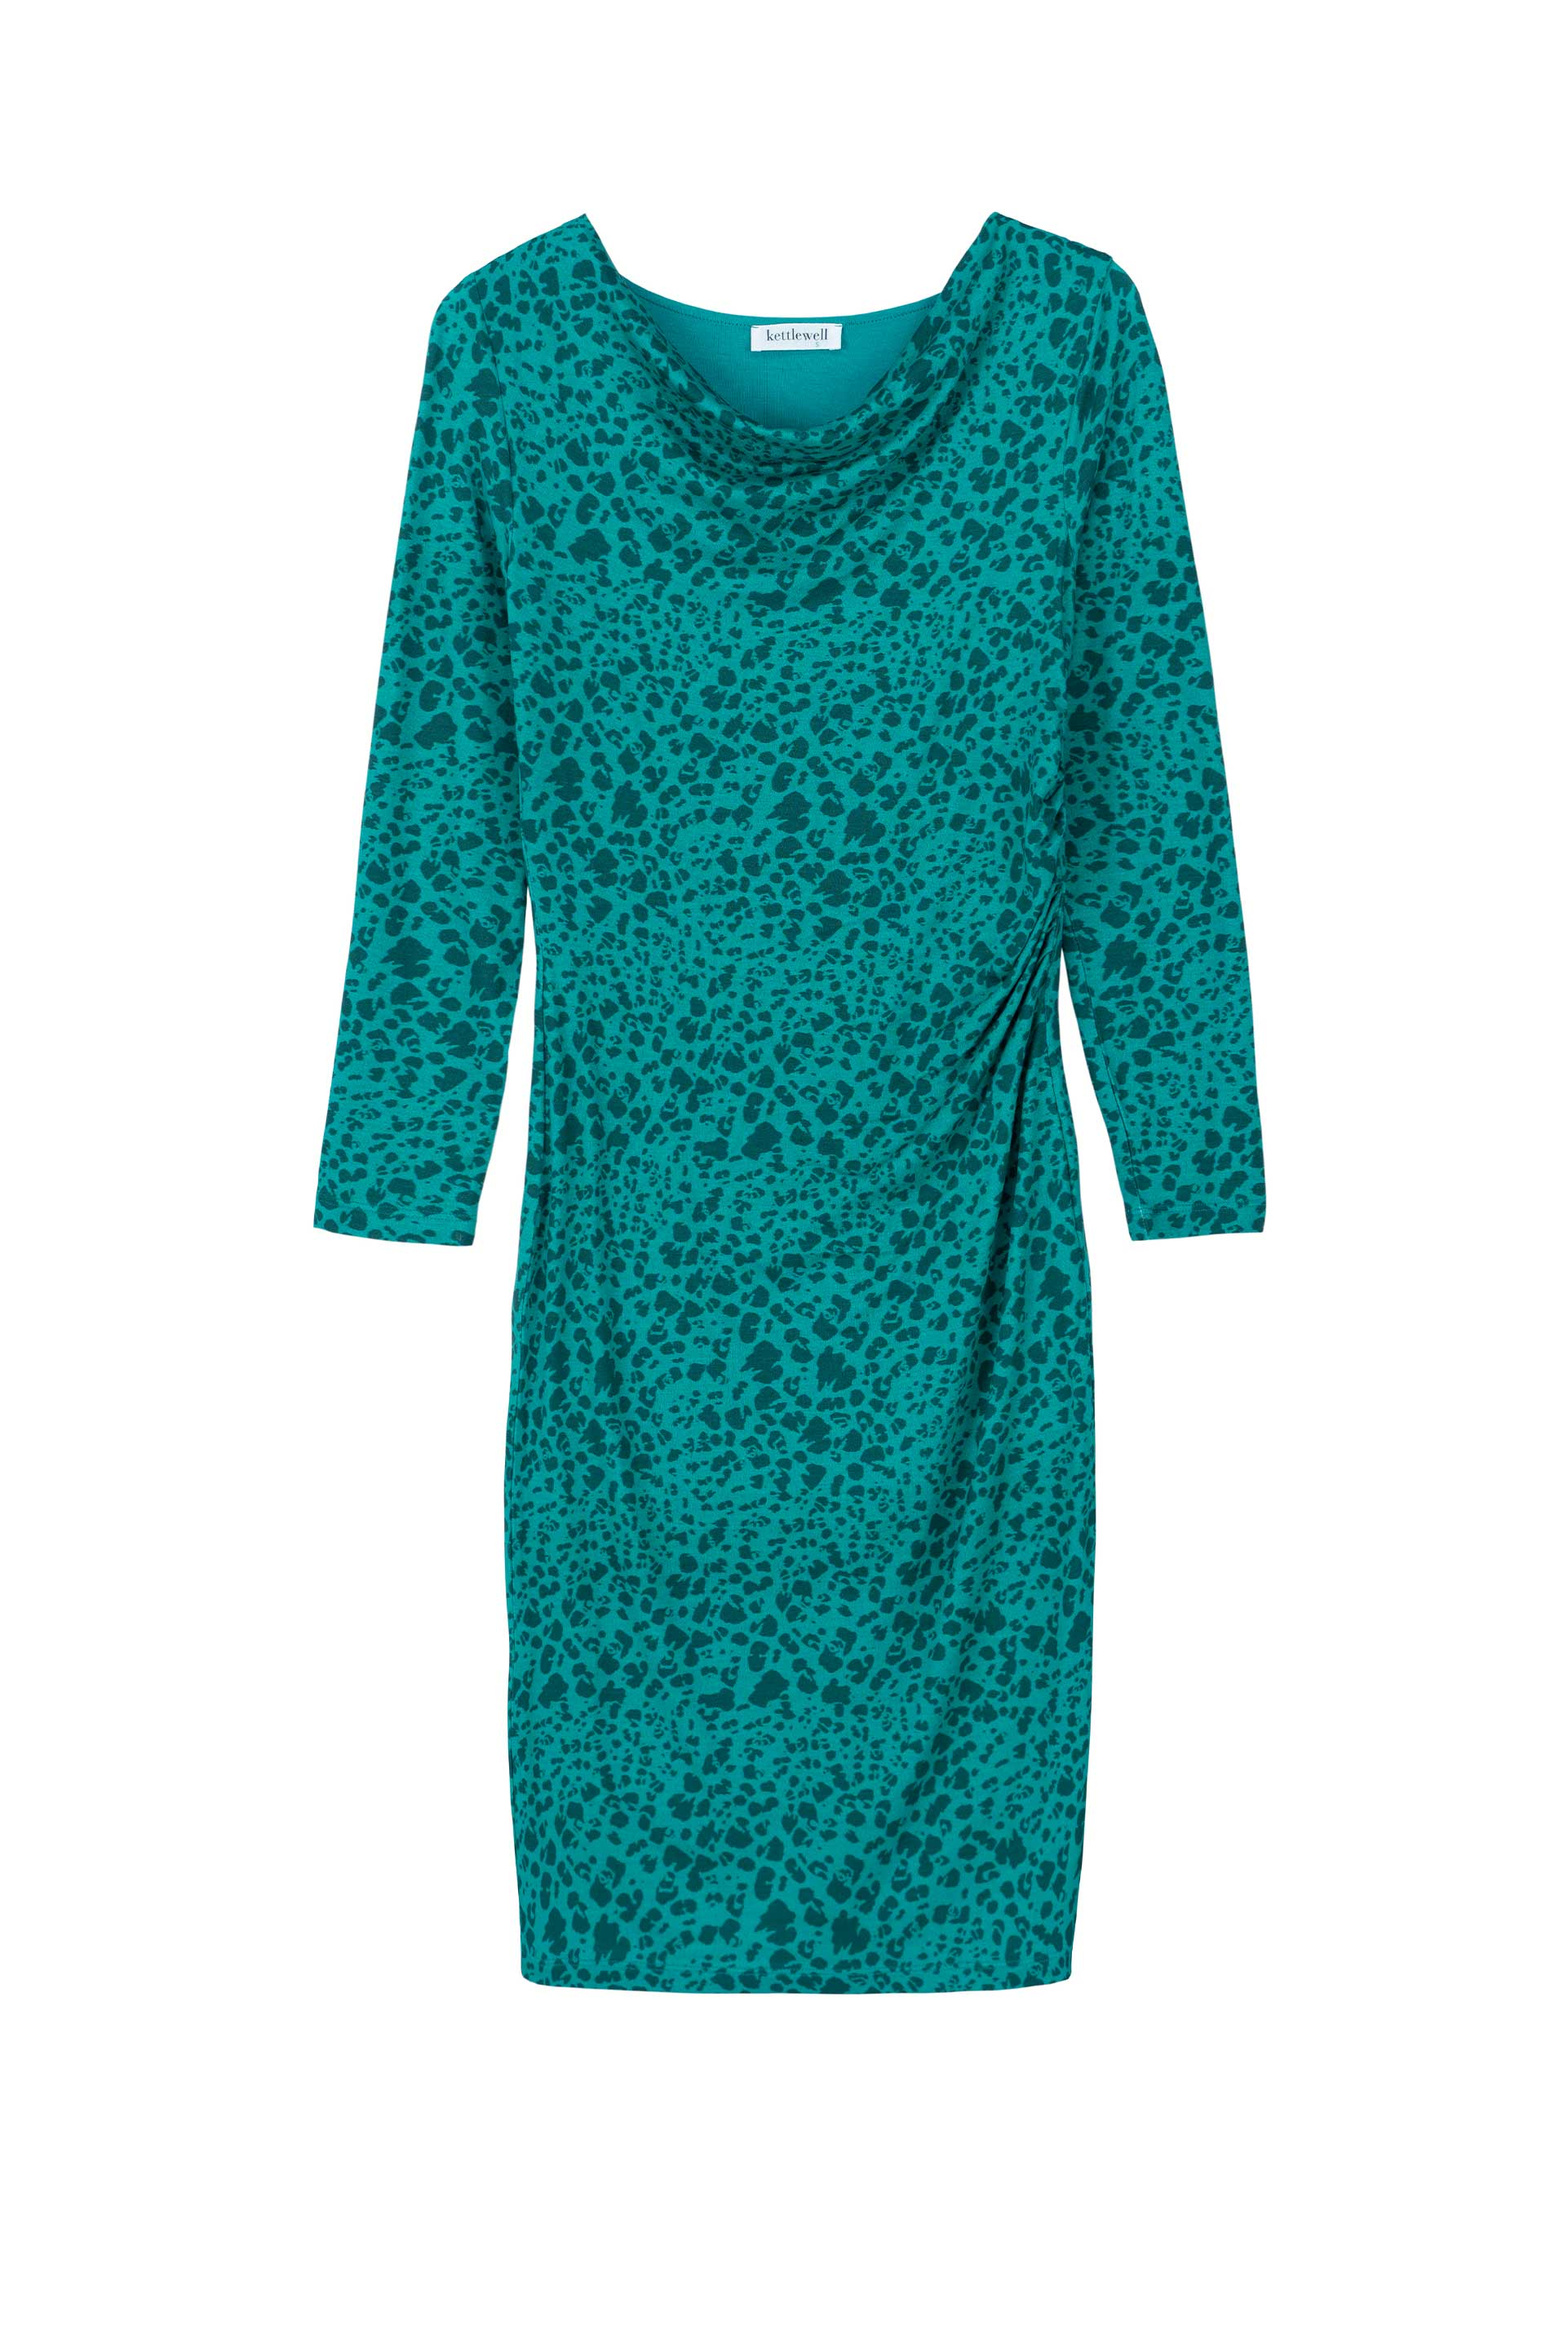 6546_cowl_neck_dress_sea_green_and_blue_spruce.jpg